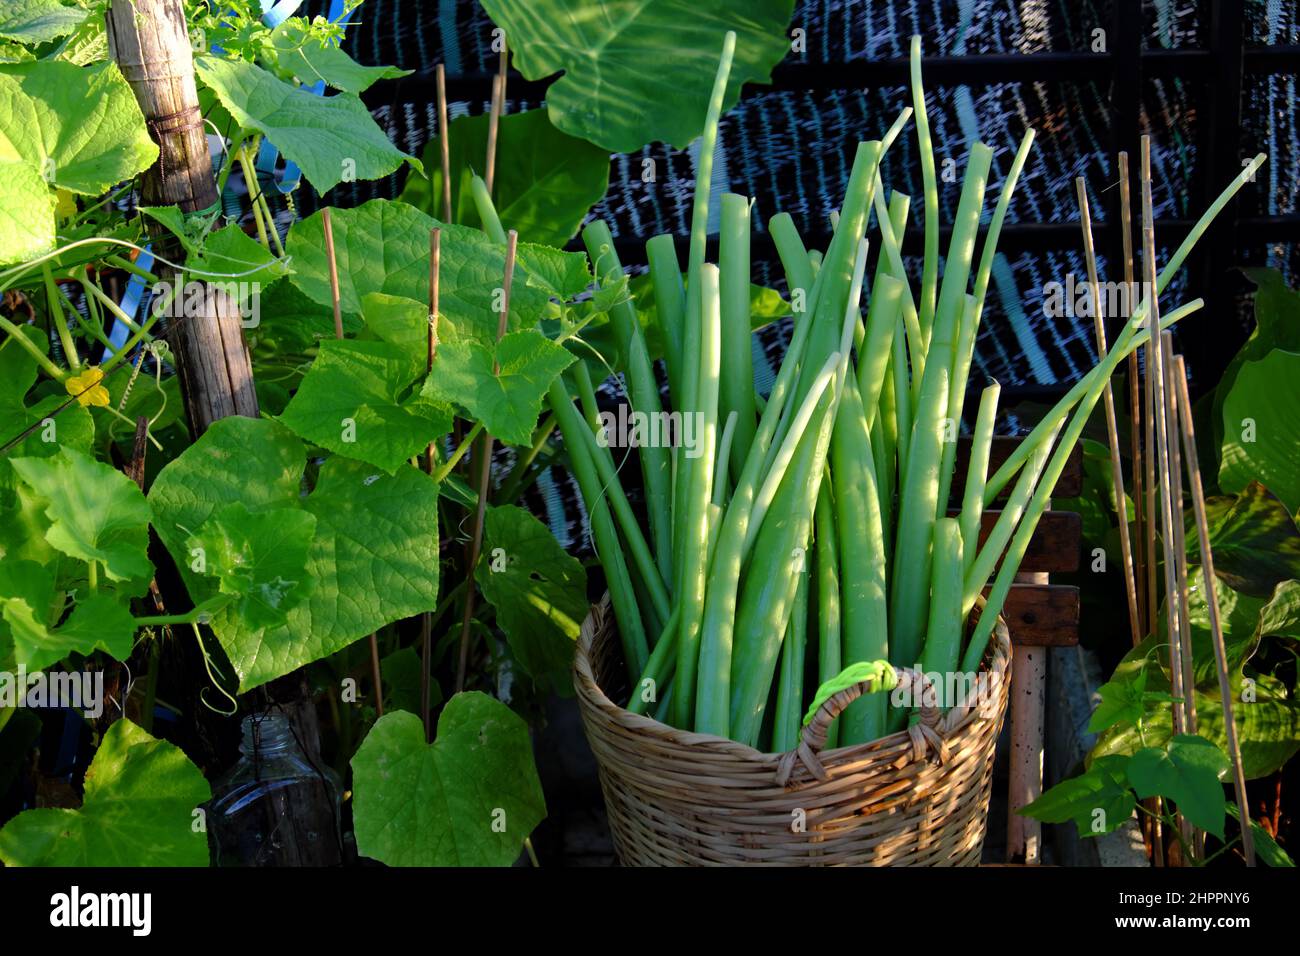 Basket of Colocasia gigantea just harvest from city rooftop garden at Ho Chi Minh city, Vietnam, is food ingredient for many dish Stock Photo